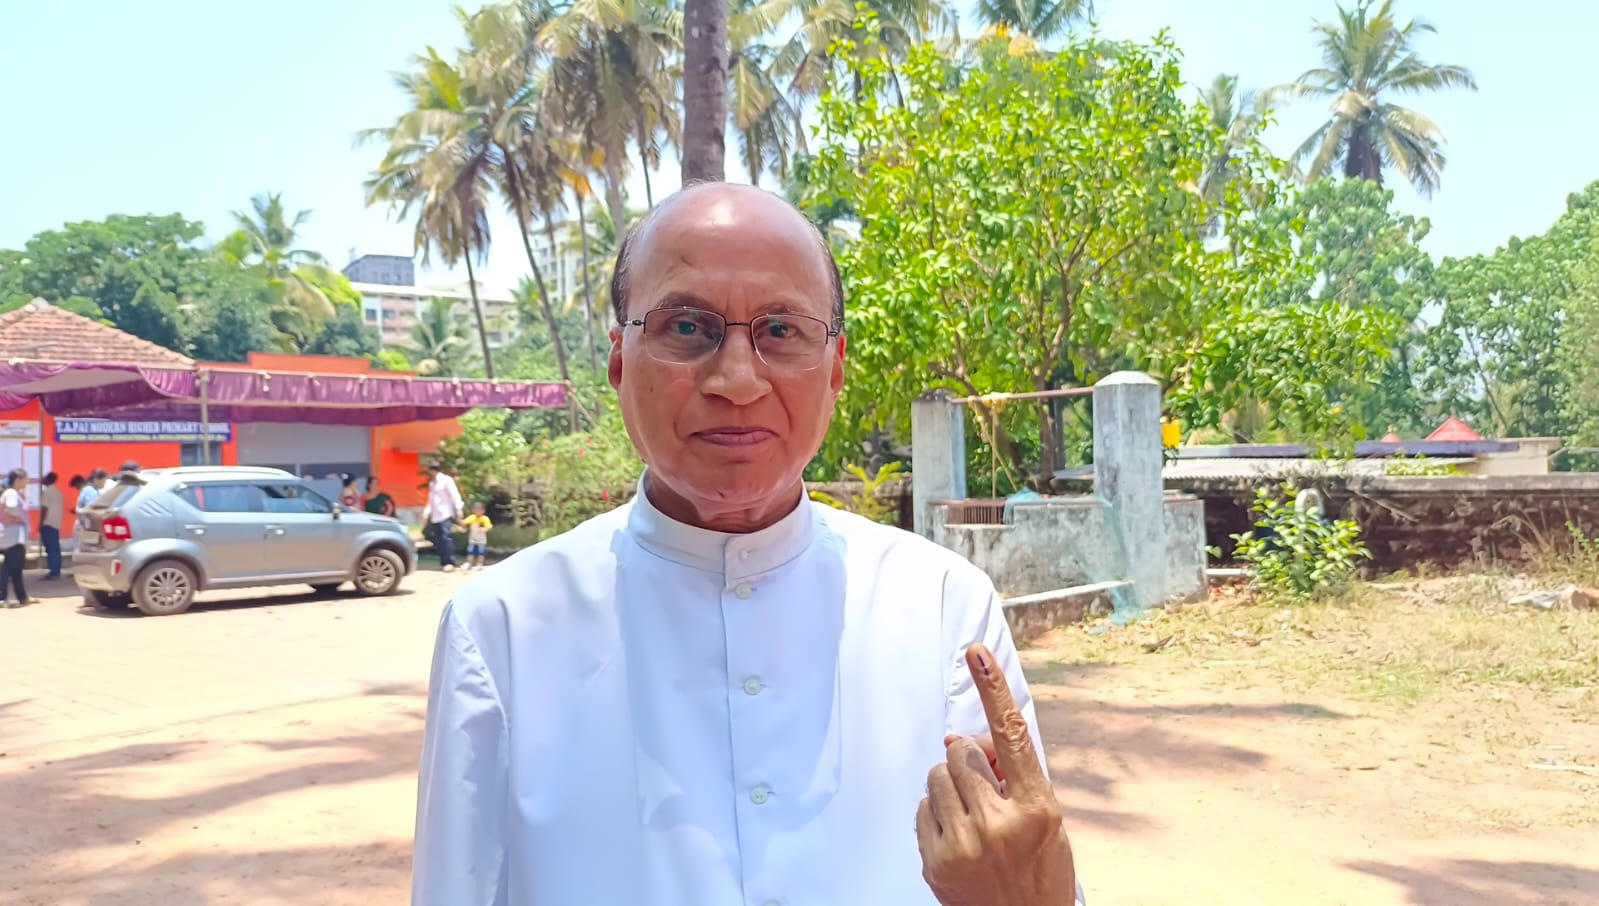 Bishop of Udupi diocese and pontiffs of Sri Krishna Math casts votes in their respective polling centers.